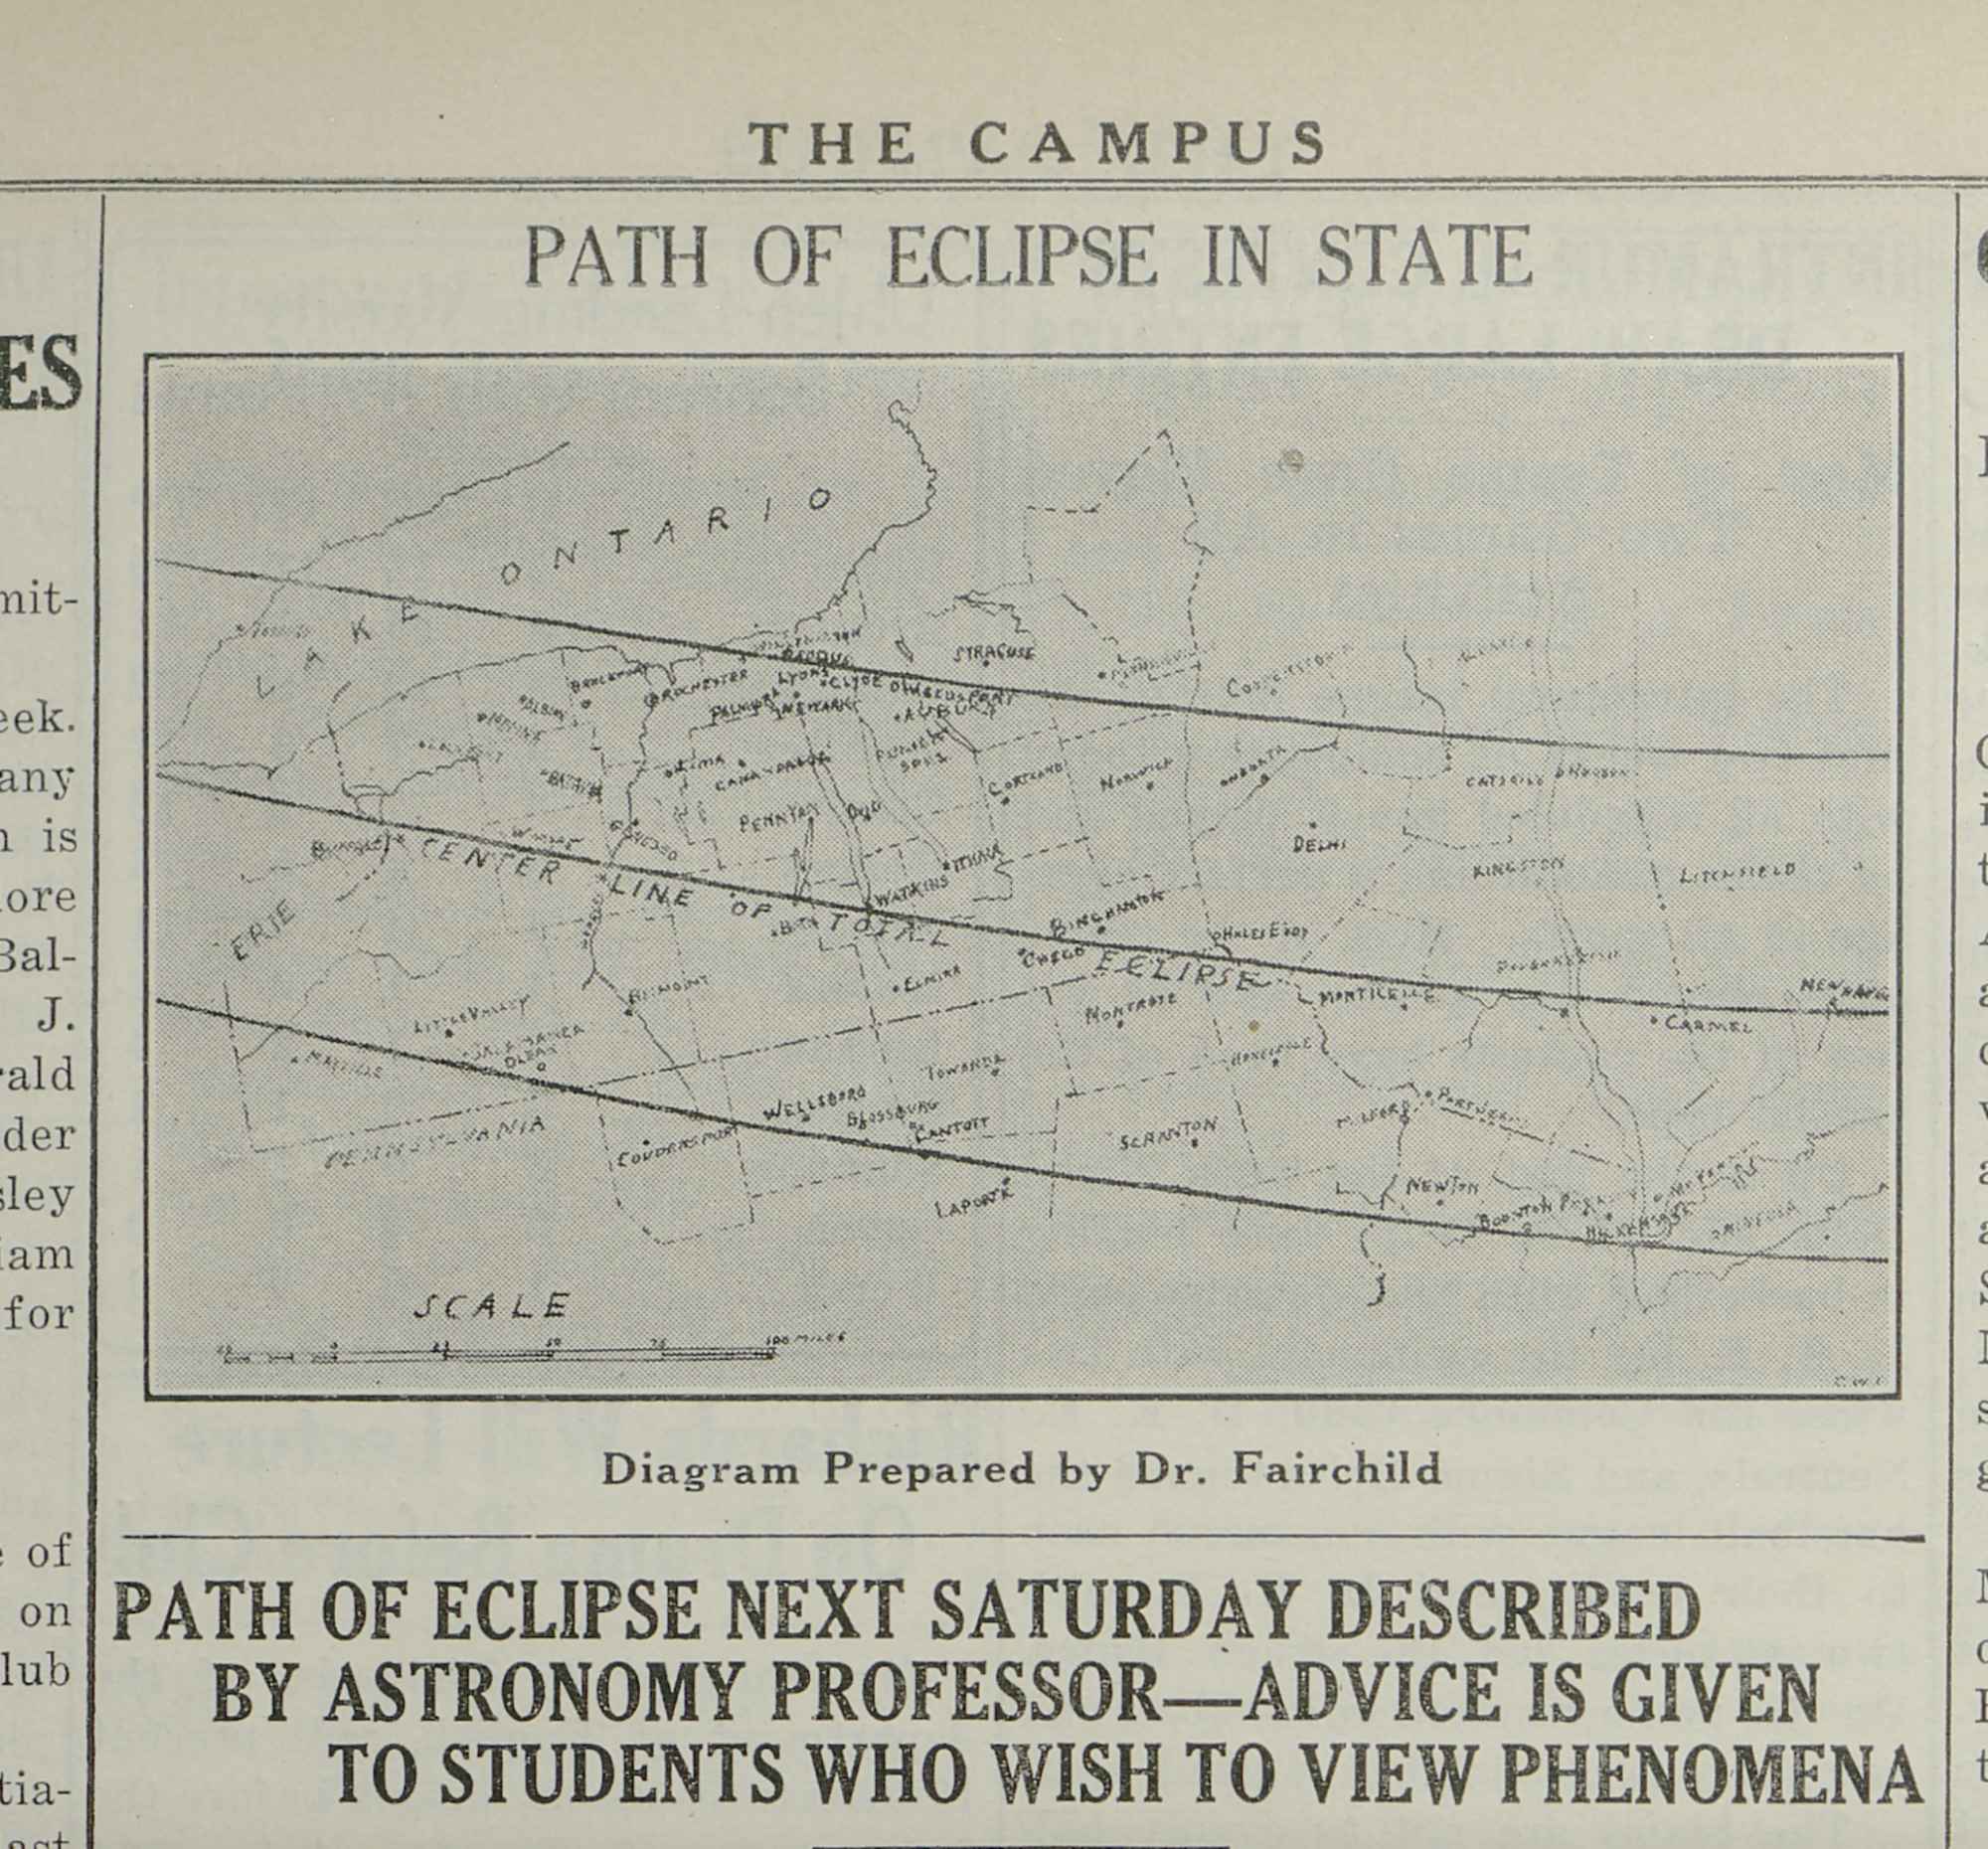 Crop of newspaper article in "The Campus" student newspaper showing a headline and illustration about the path of the 1925 eclipse.